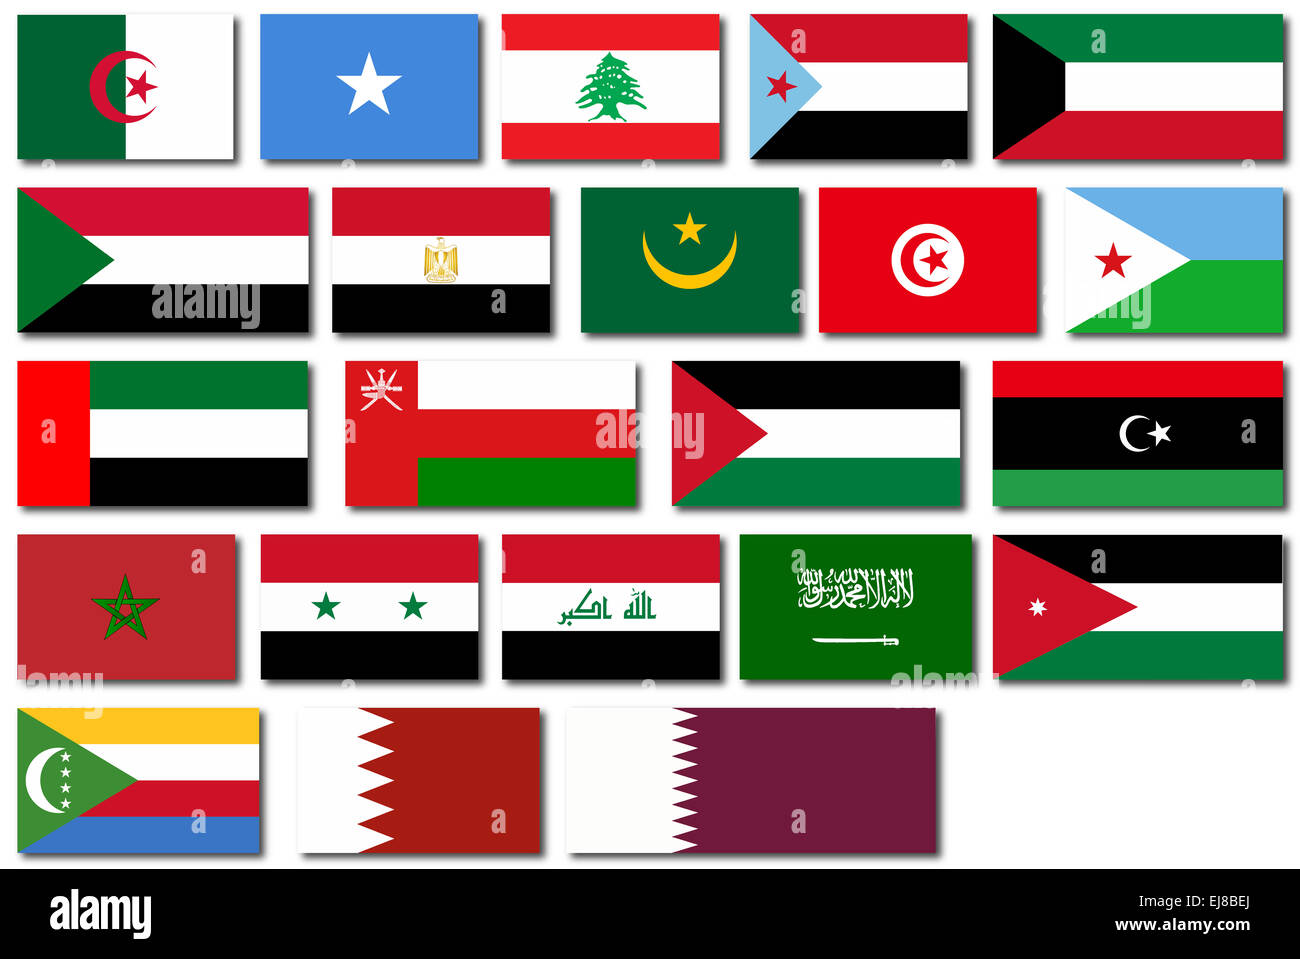 Flags of countries in The Arab League over a white background Stock Photo